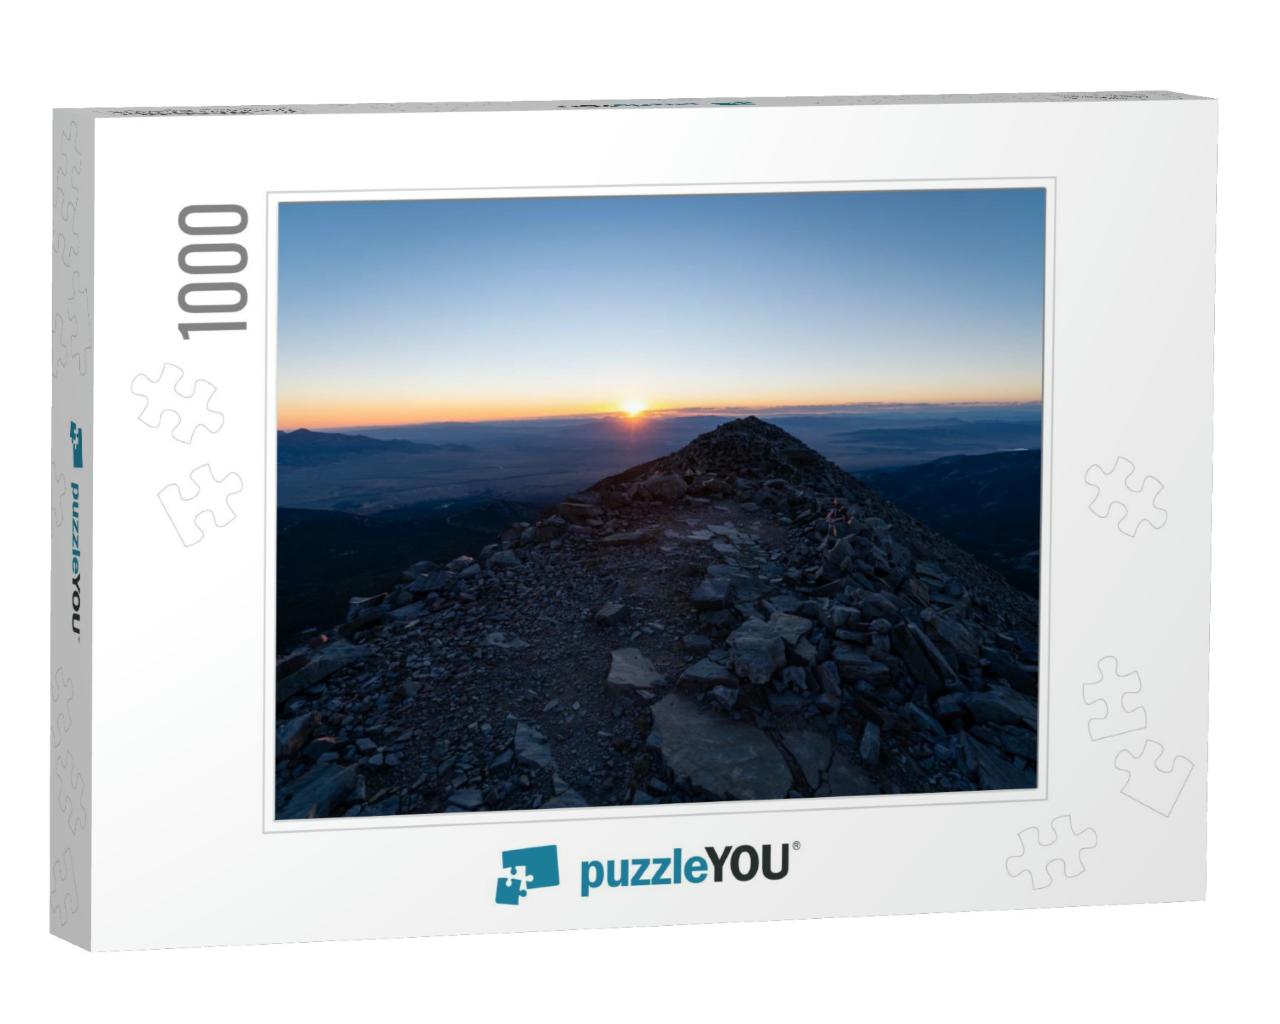 This Was Shot on the Summit of Wheeler Peak in Great Basi... Jigsaw Puzzle with 1000 pieces